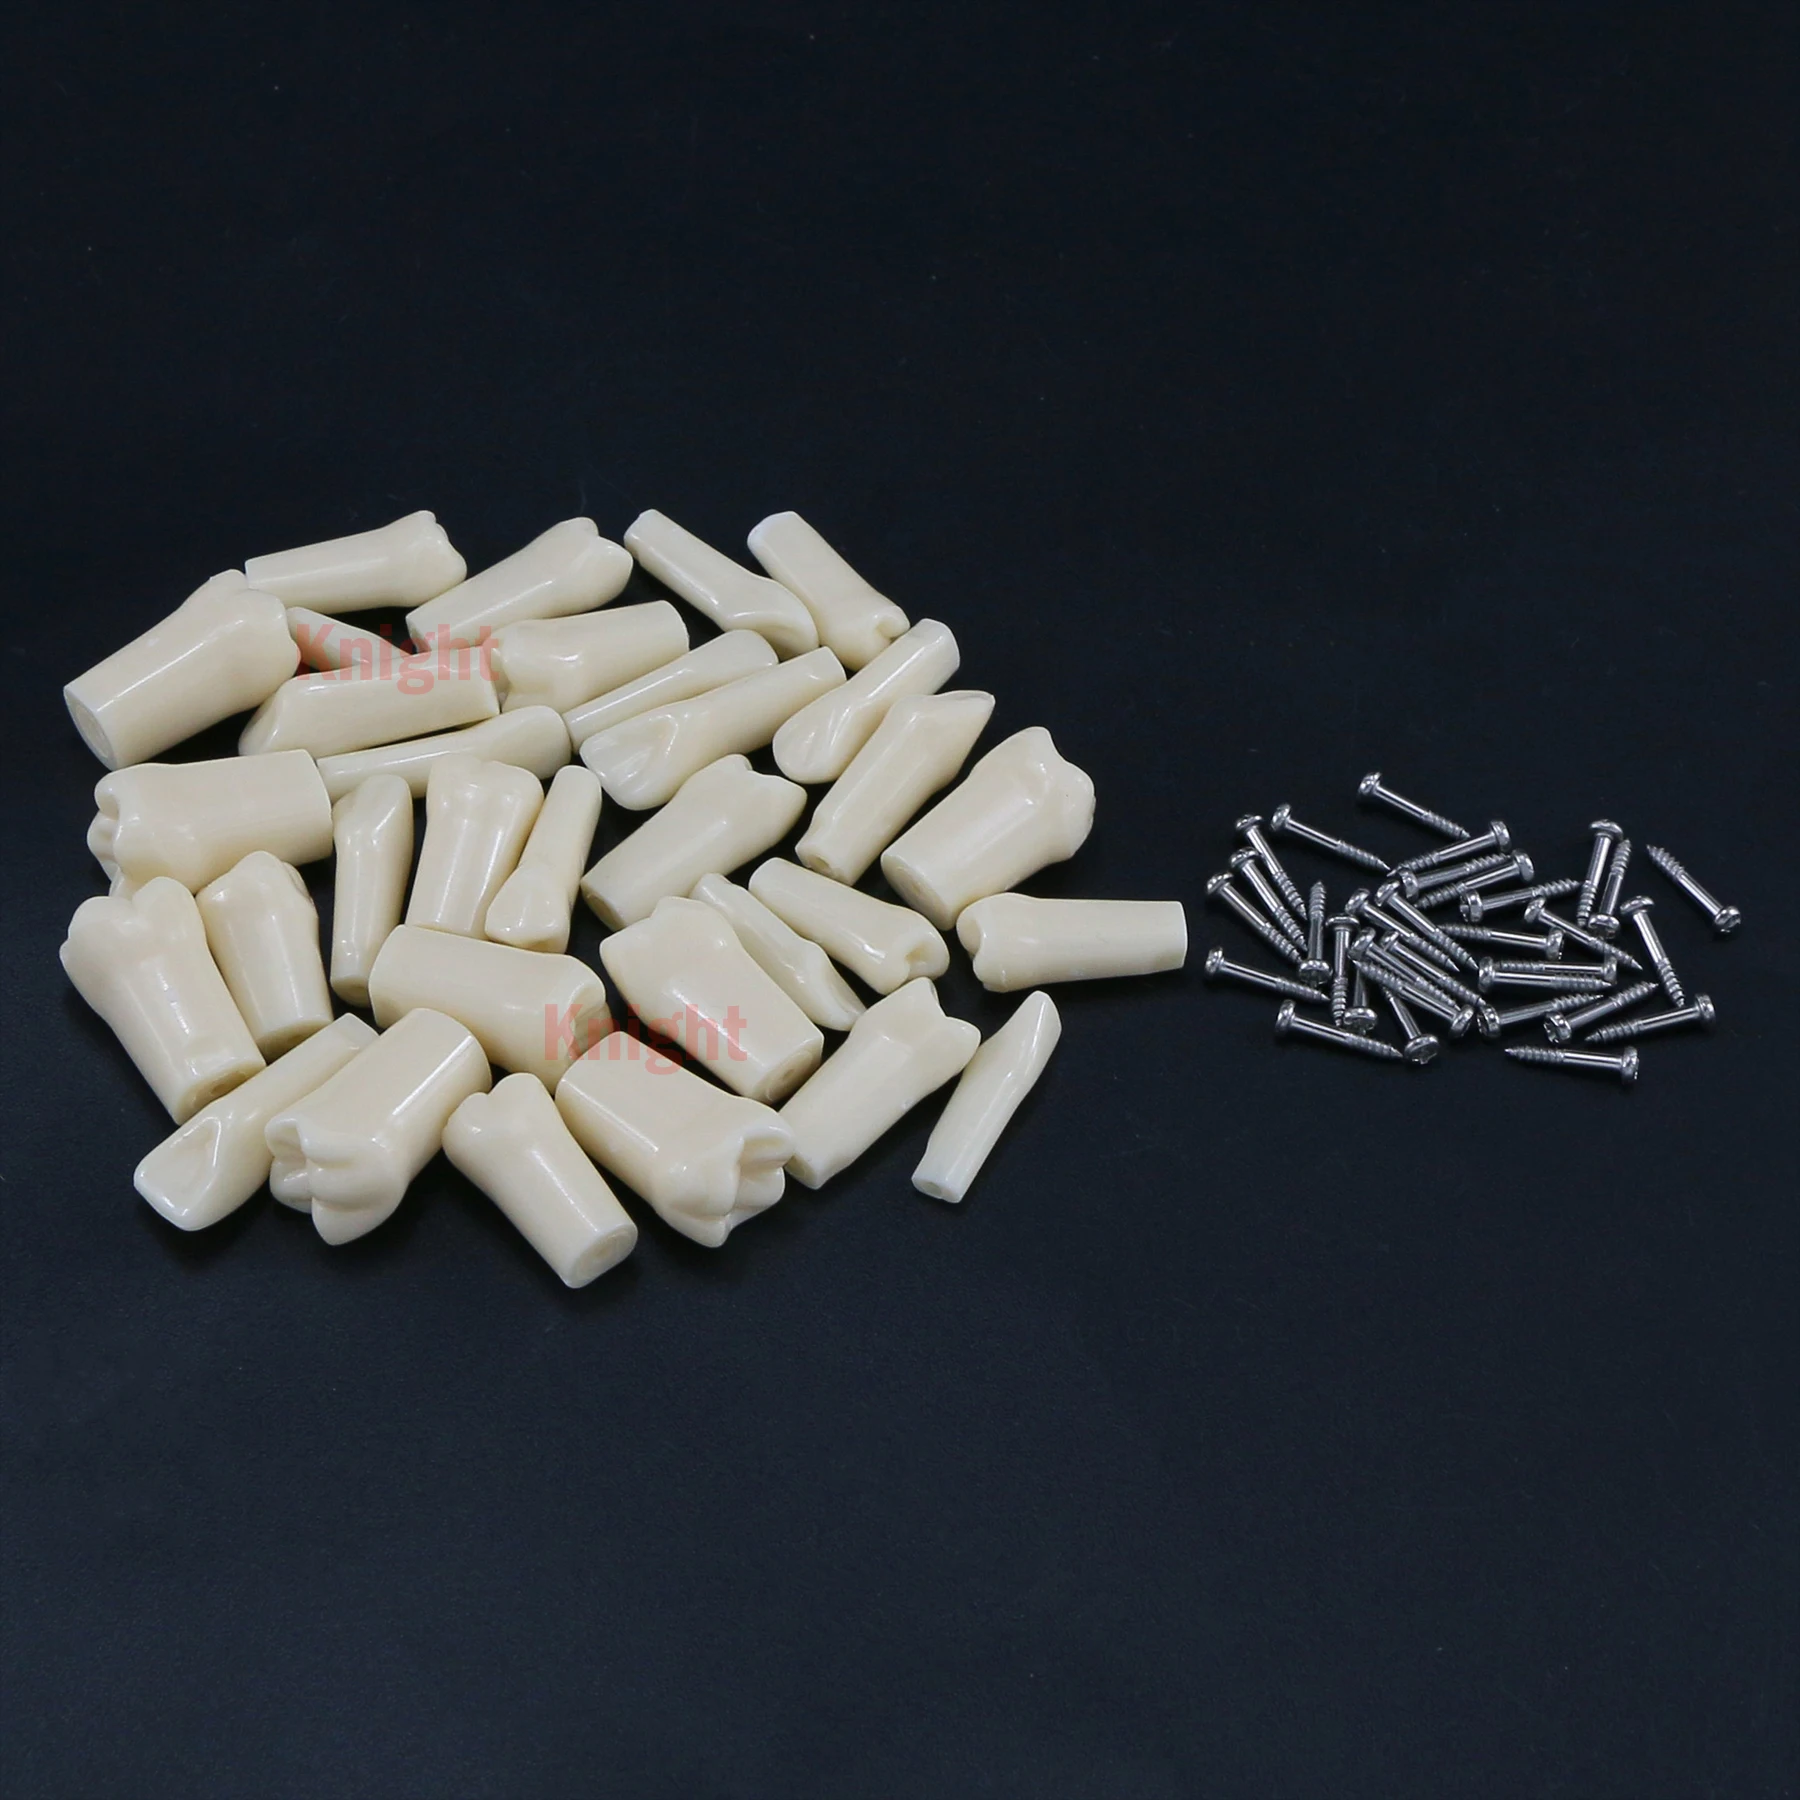 32Pcs Dental Teeth Models for Training Teaching Dentistry Imitation Resin Dentures Compatible NISSIN 200 Type Replacement Tooth